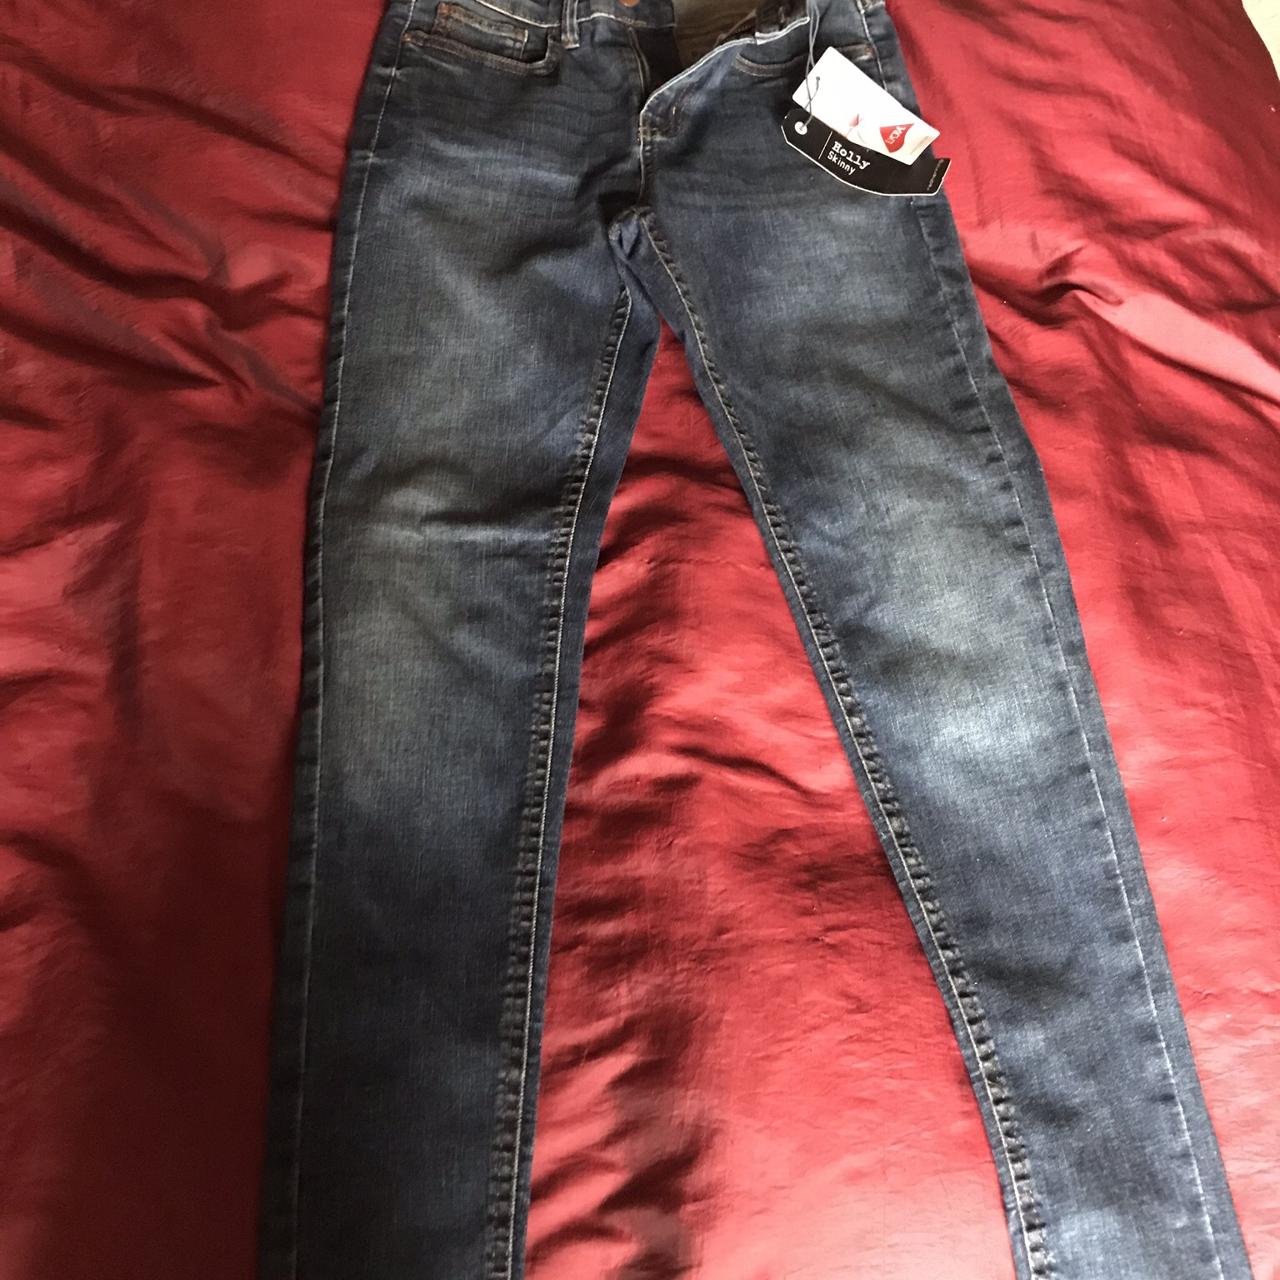 Brand new Red Herring jeans with tags. “Holly” Mid... - Depop